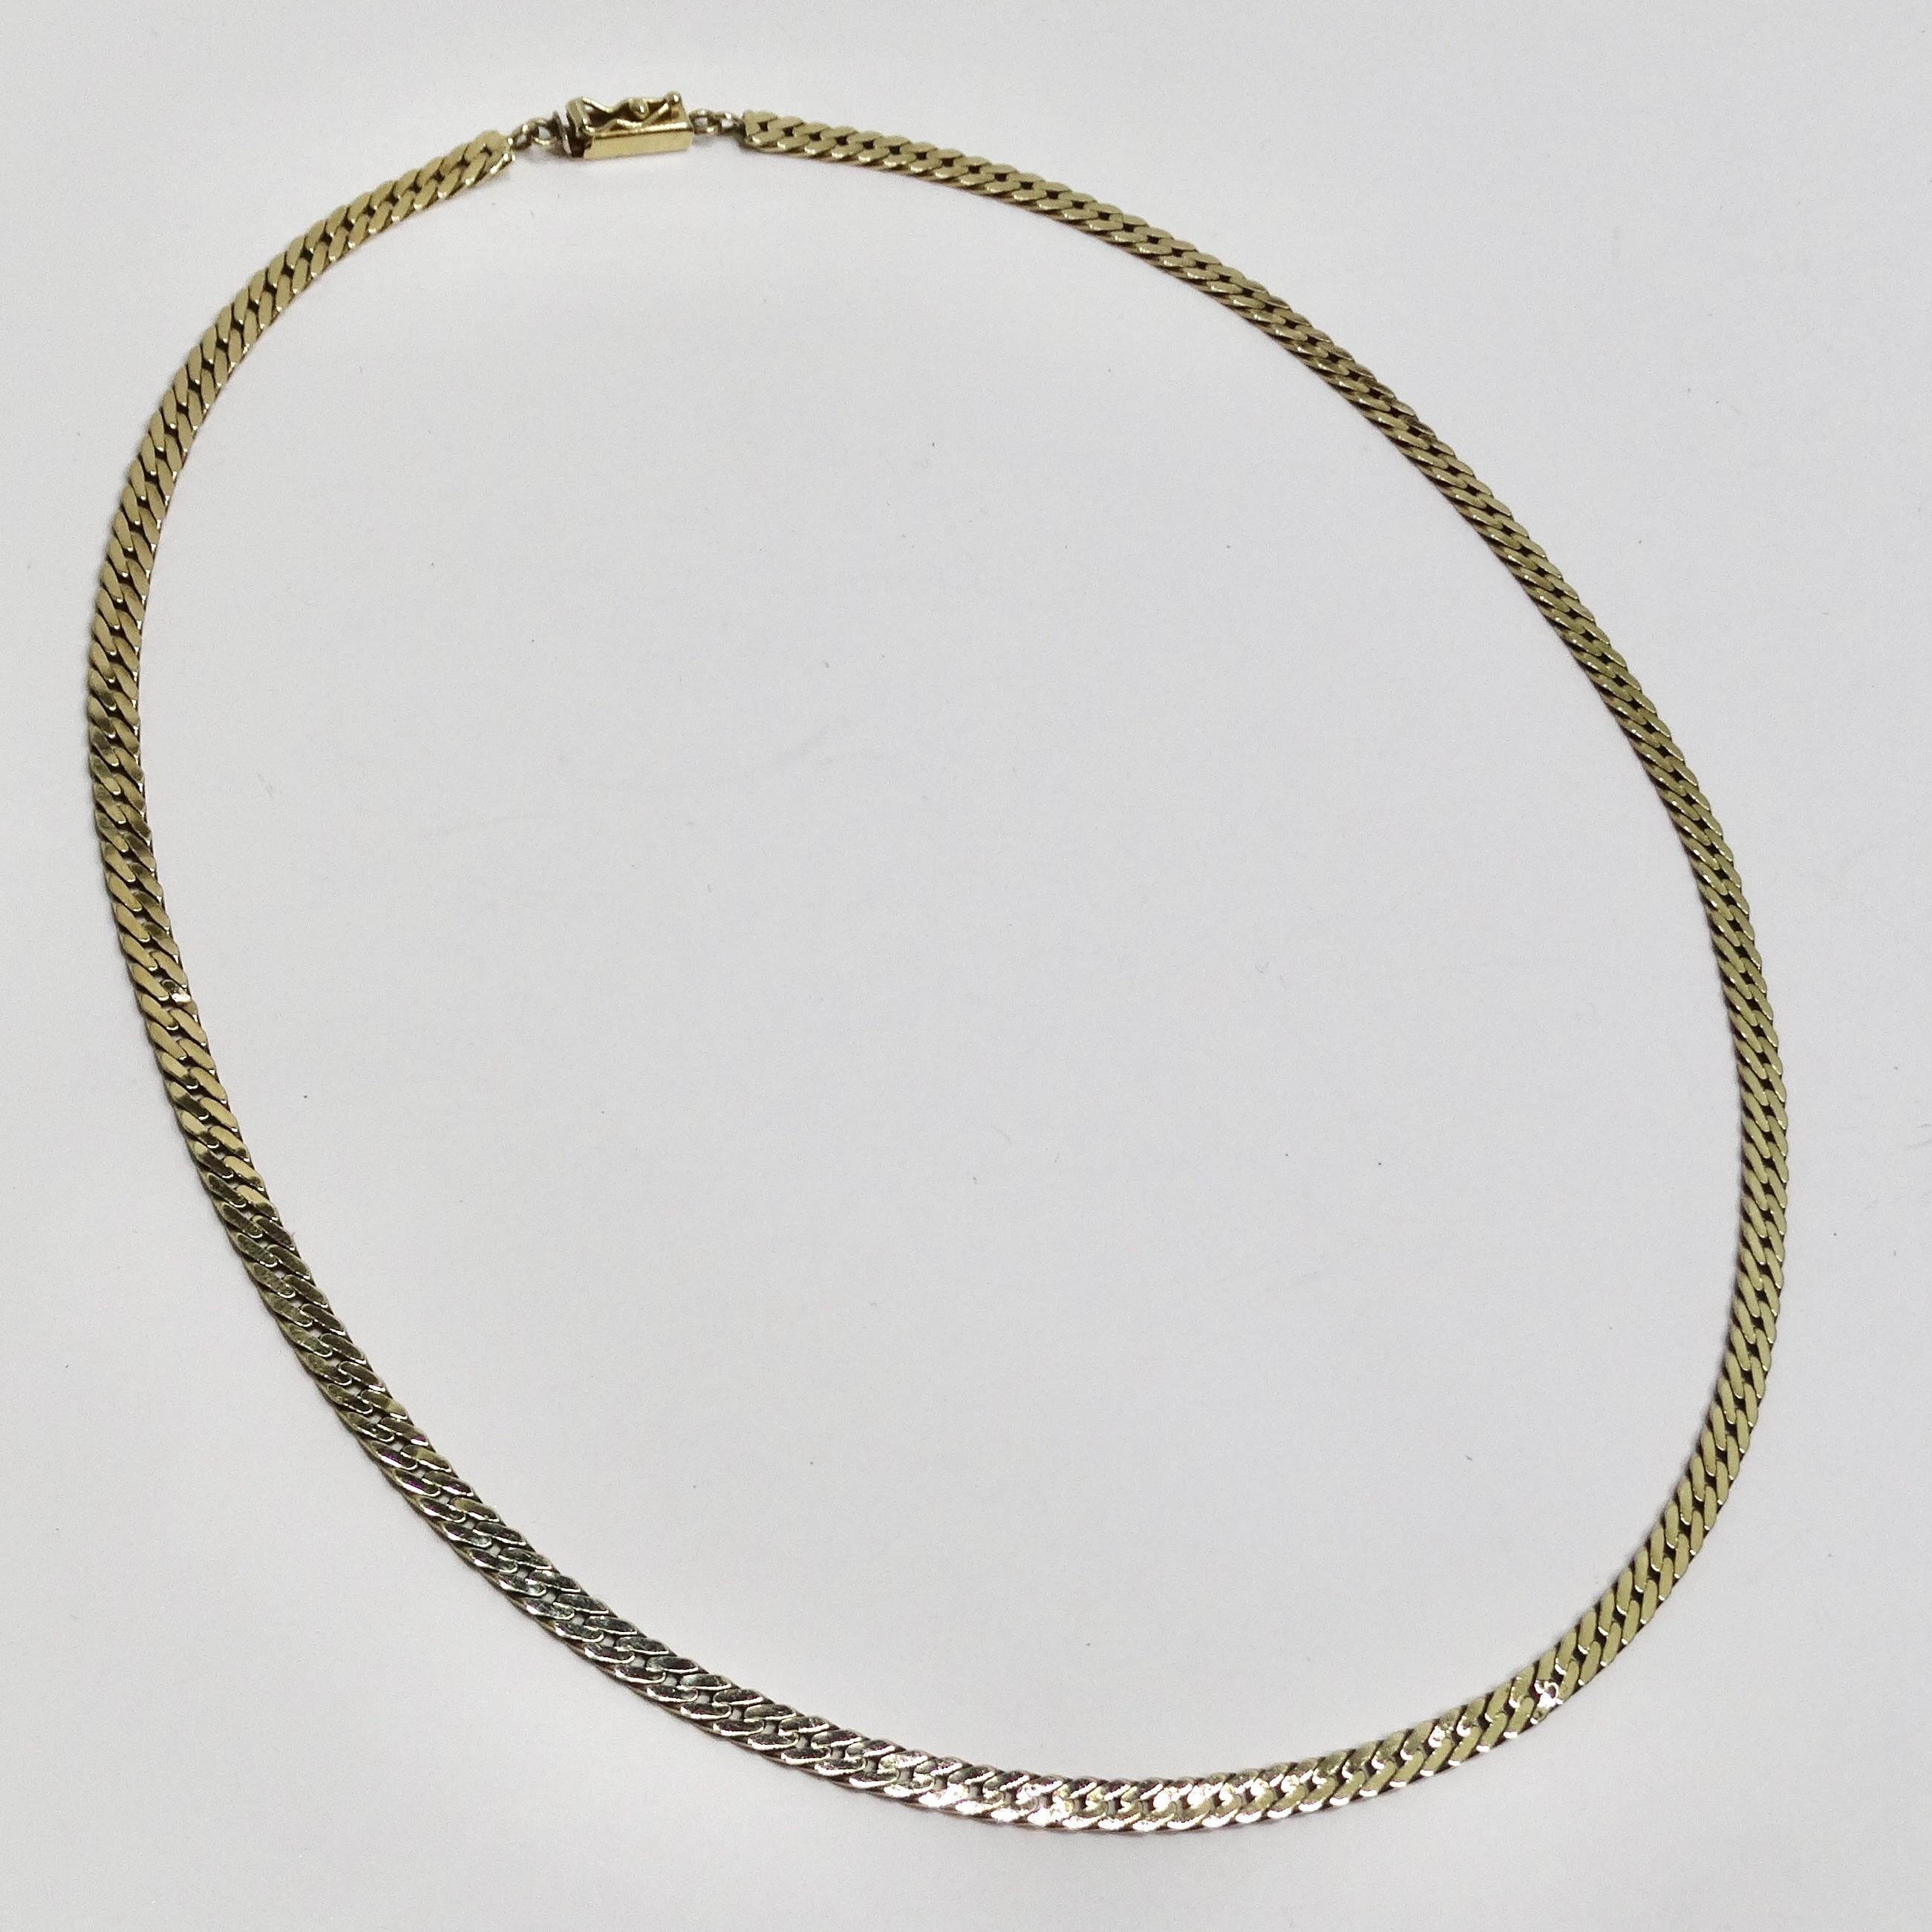 Do not miss out on the 14K Solid Gold 1980s Chain Necklace—a timeless and essential addition to your jewelry collection. This delicate chain necklace is not just an accessory; it's a closet must-have, crafted from luxurious 14k yellow gold to